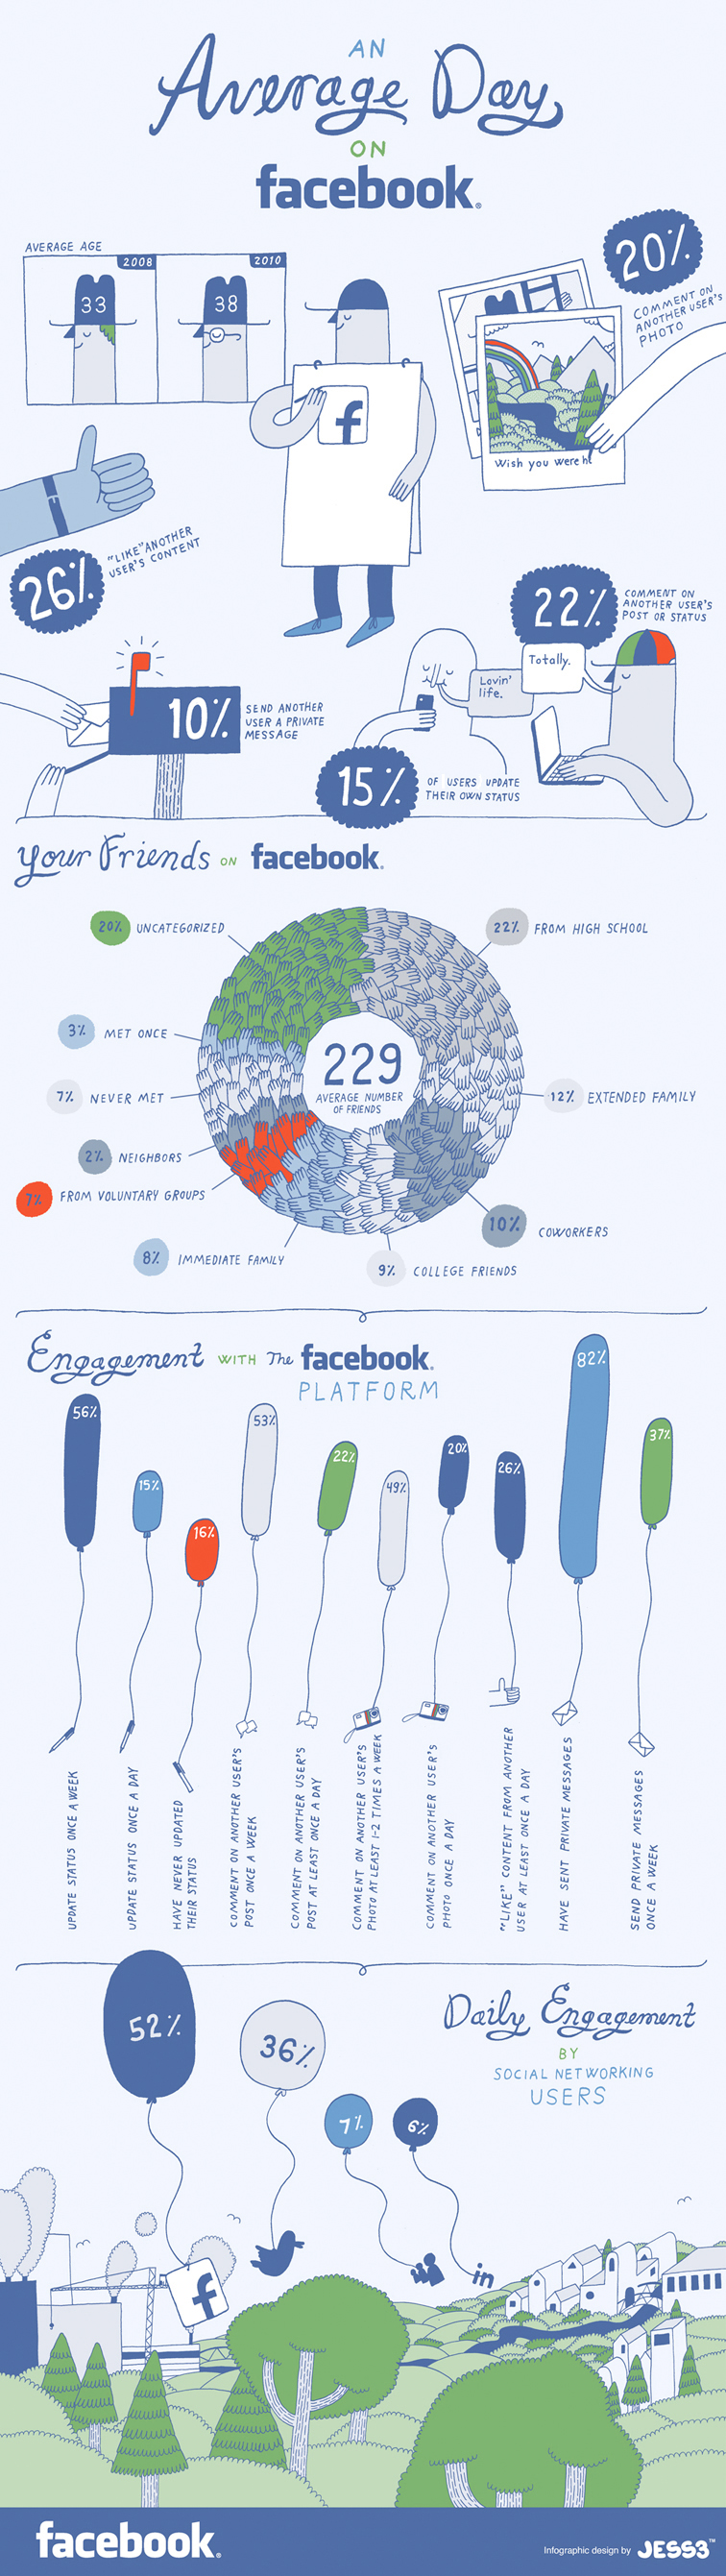 The State of Facebook Infographic 1659